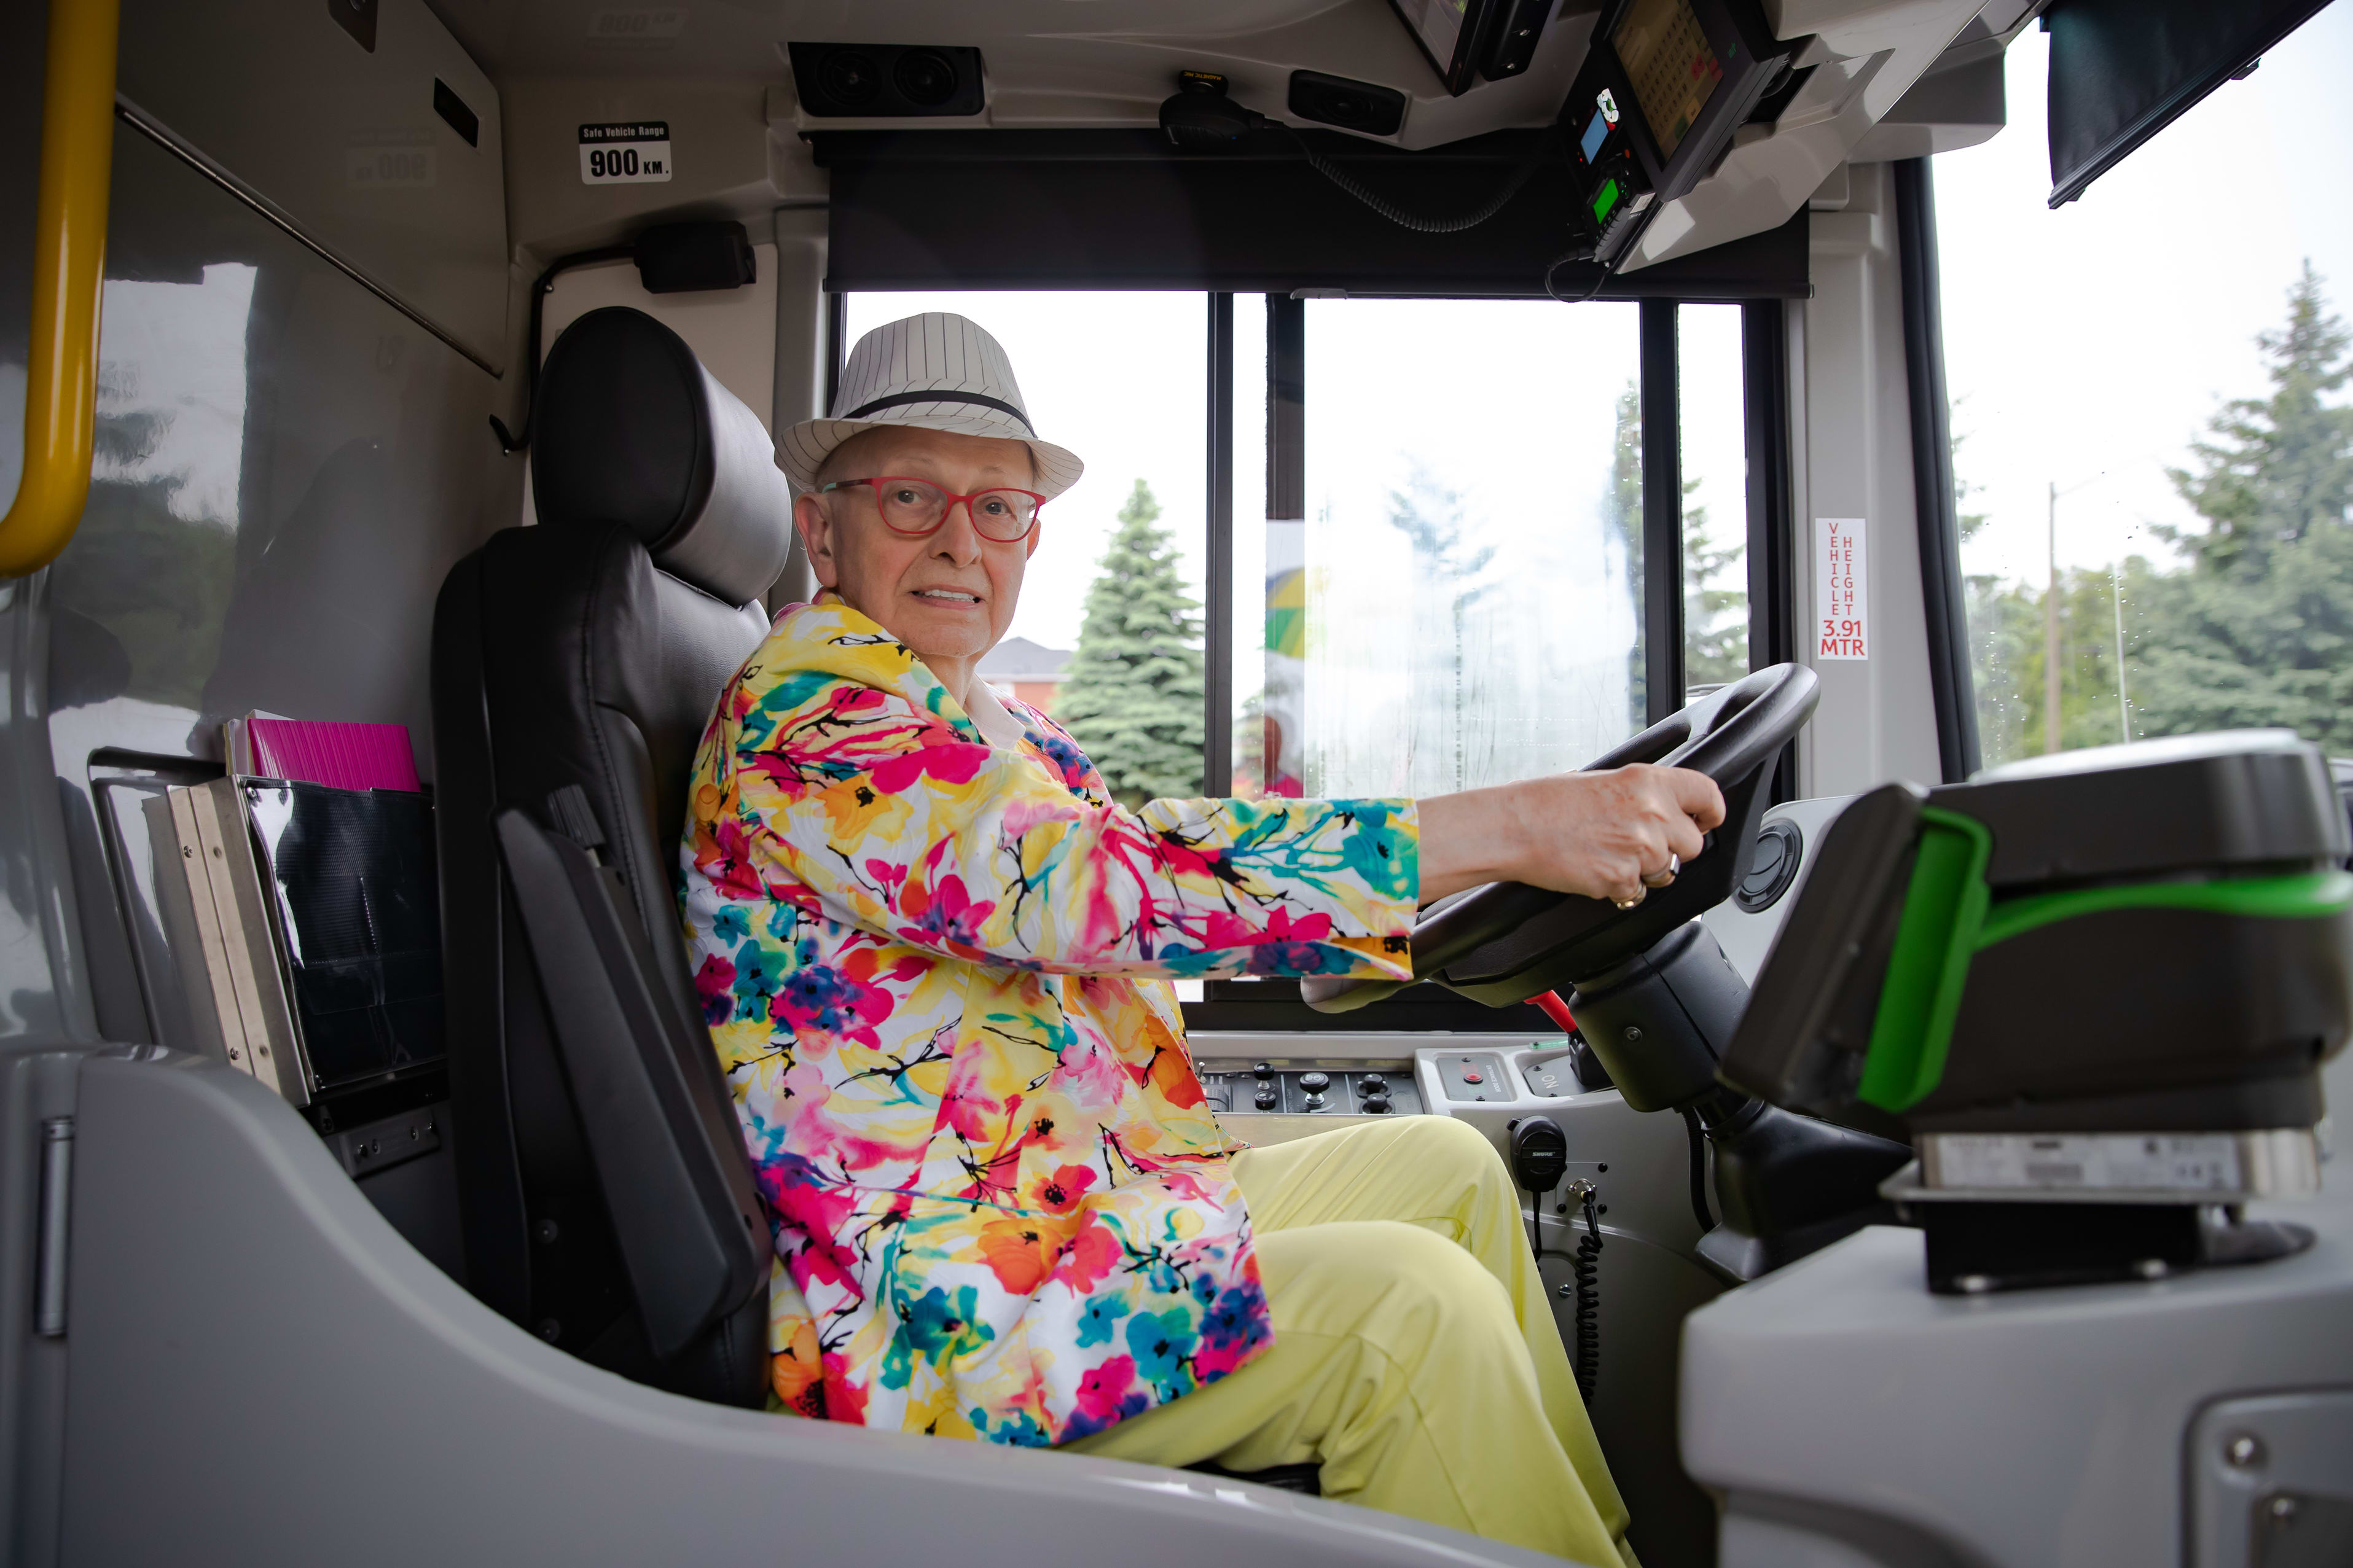 Russell poses as he has his hands on the wheel of a GO bus.